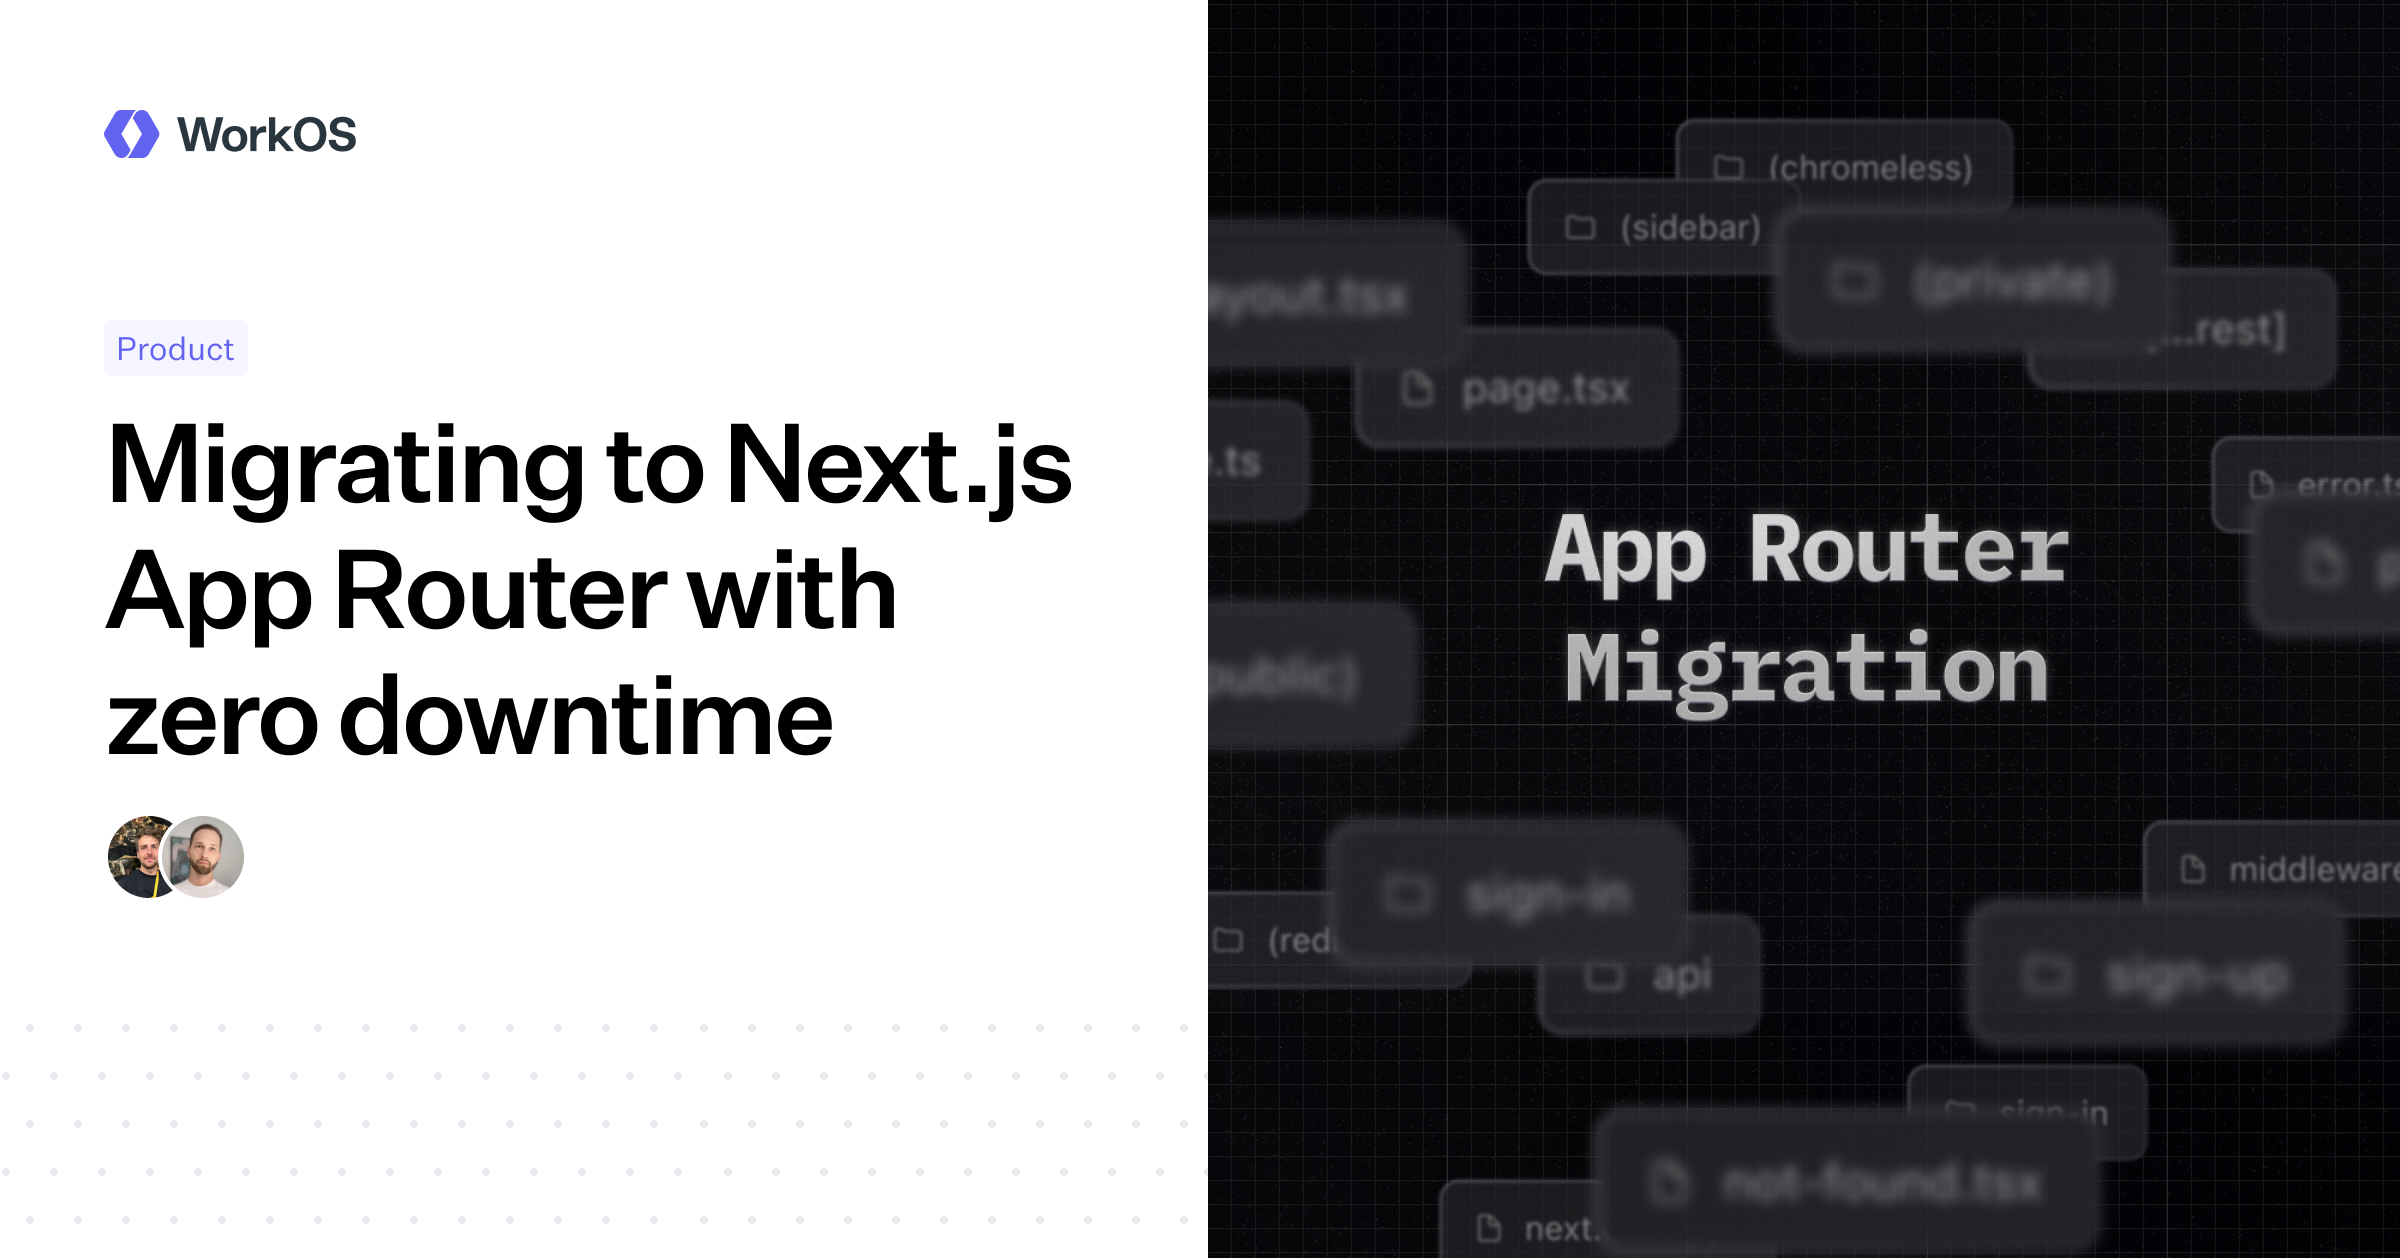 Migrating to Next.js App Router with zero downtime — WorkOS